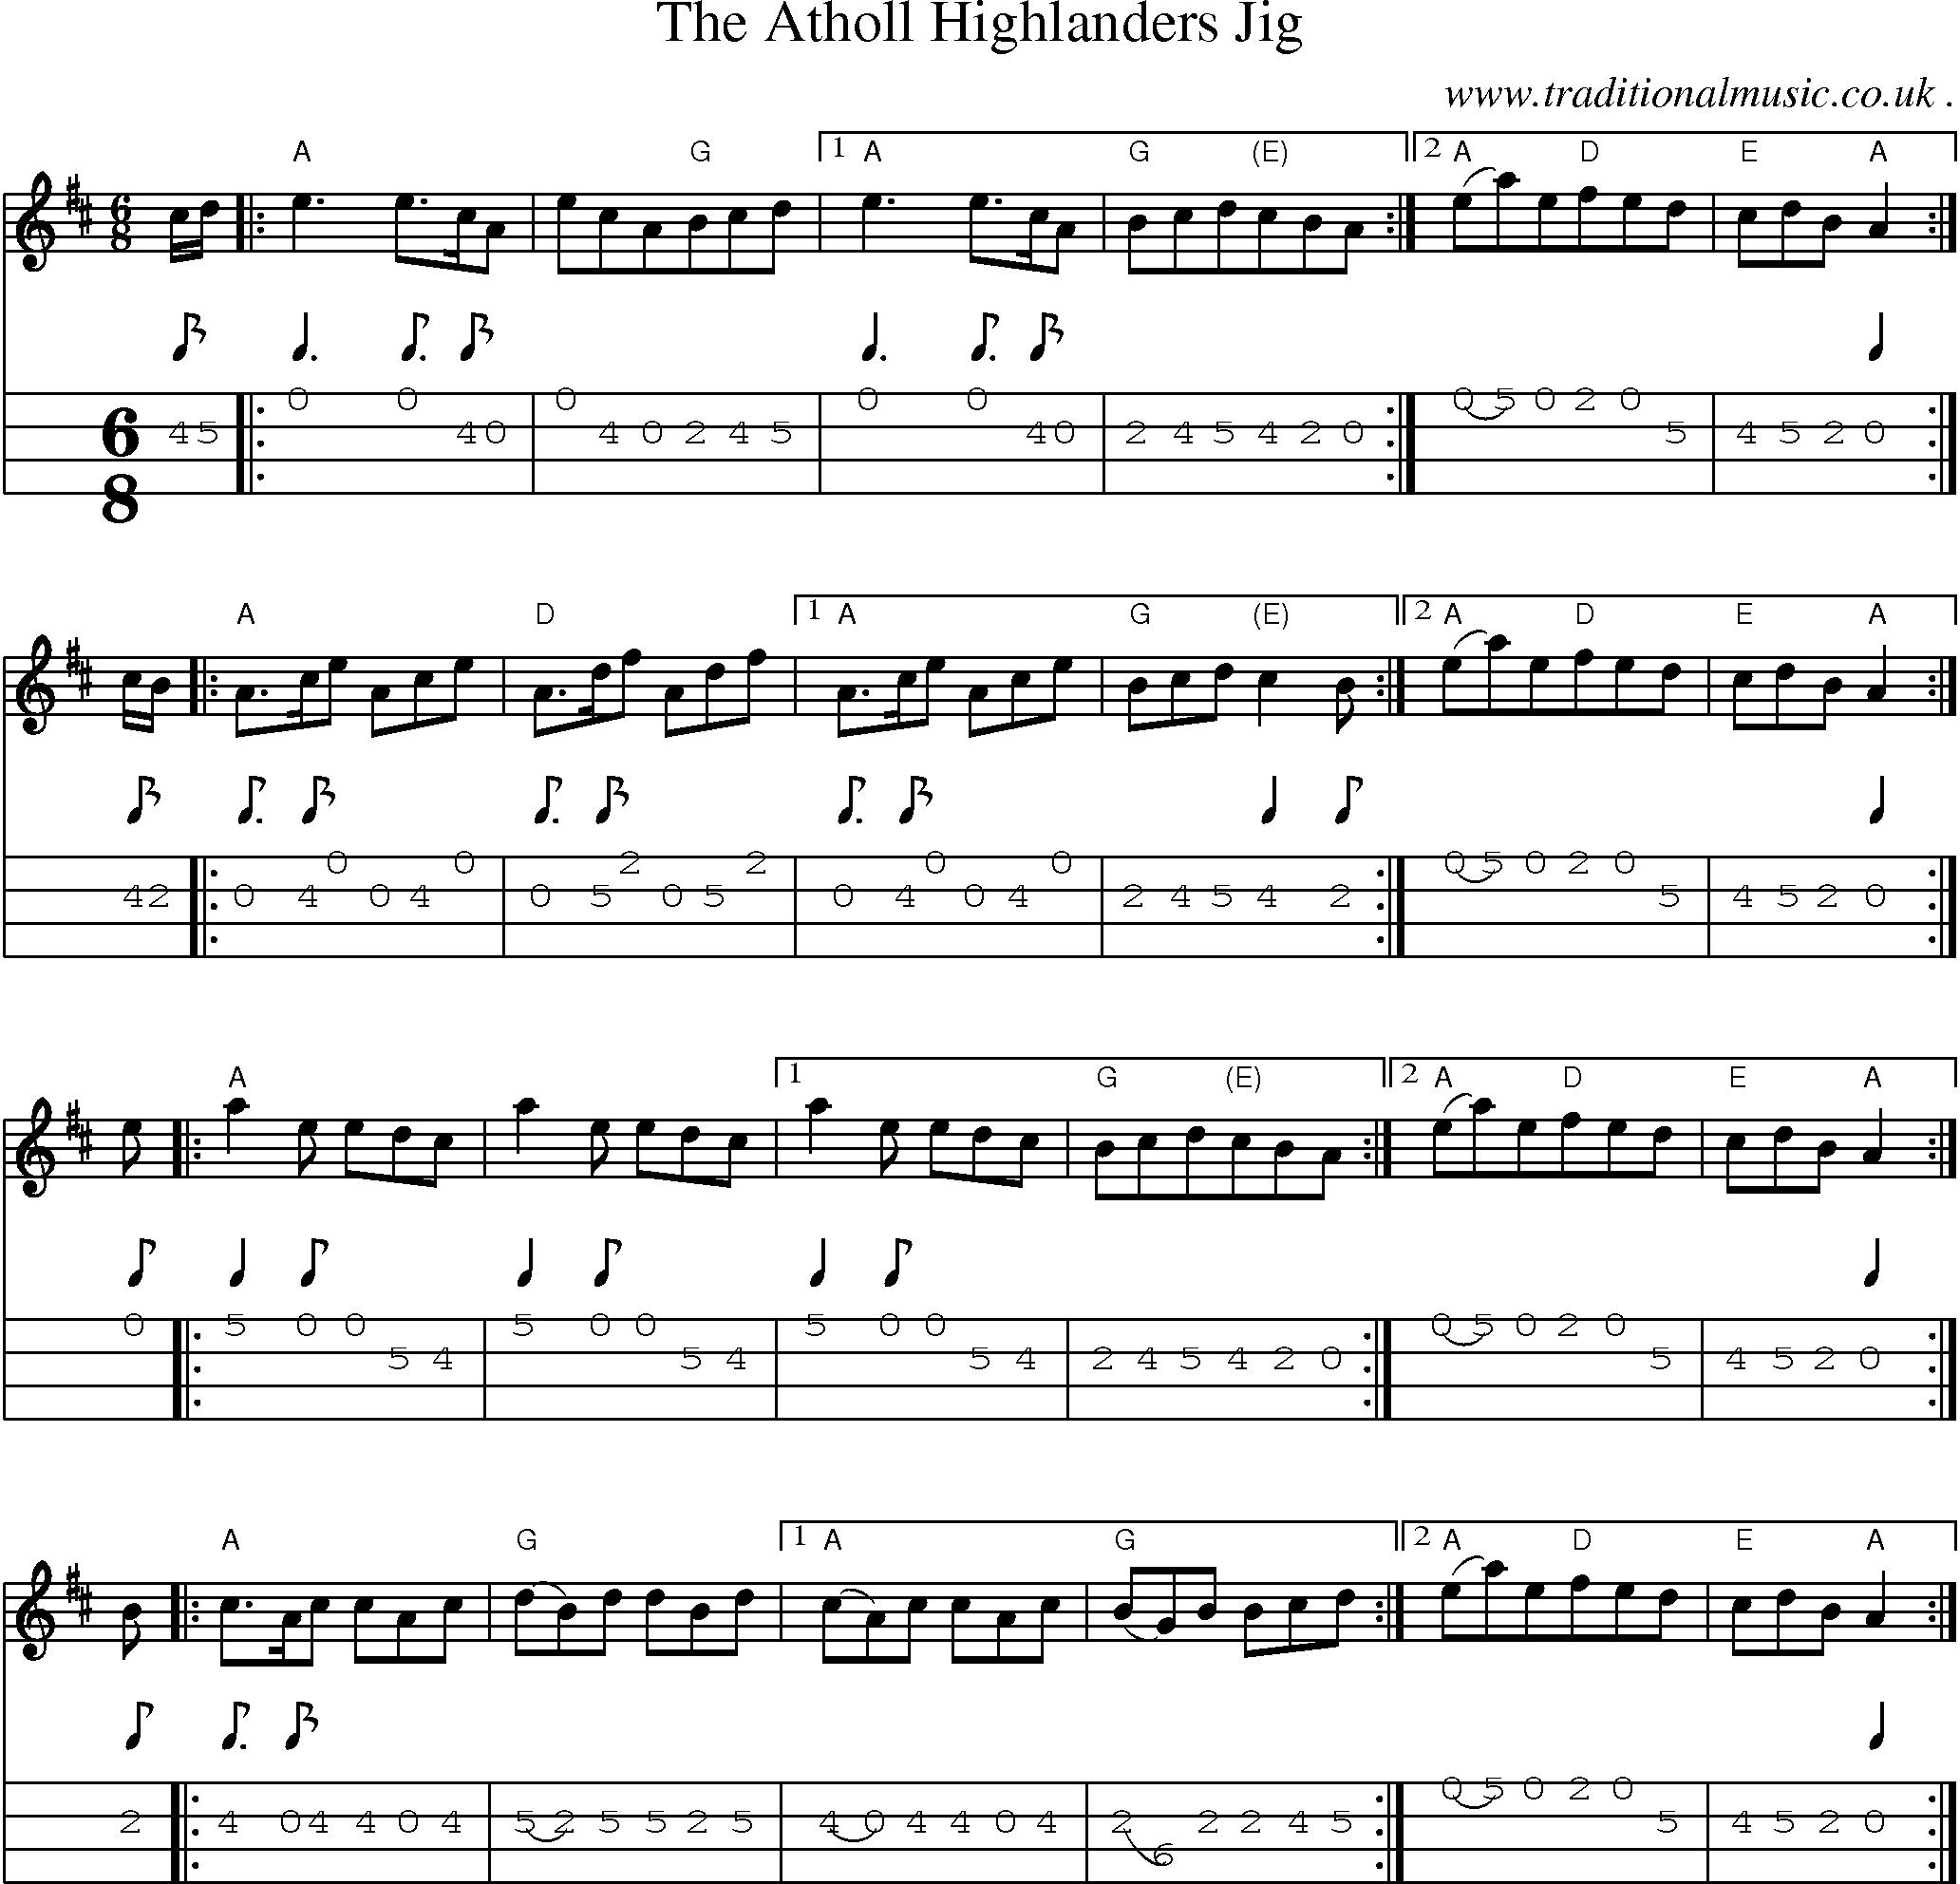 Sheet-Music and Mandolin Tabs for The Atholl Highlanders Jig